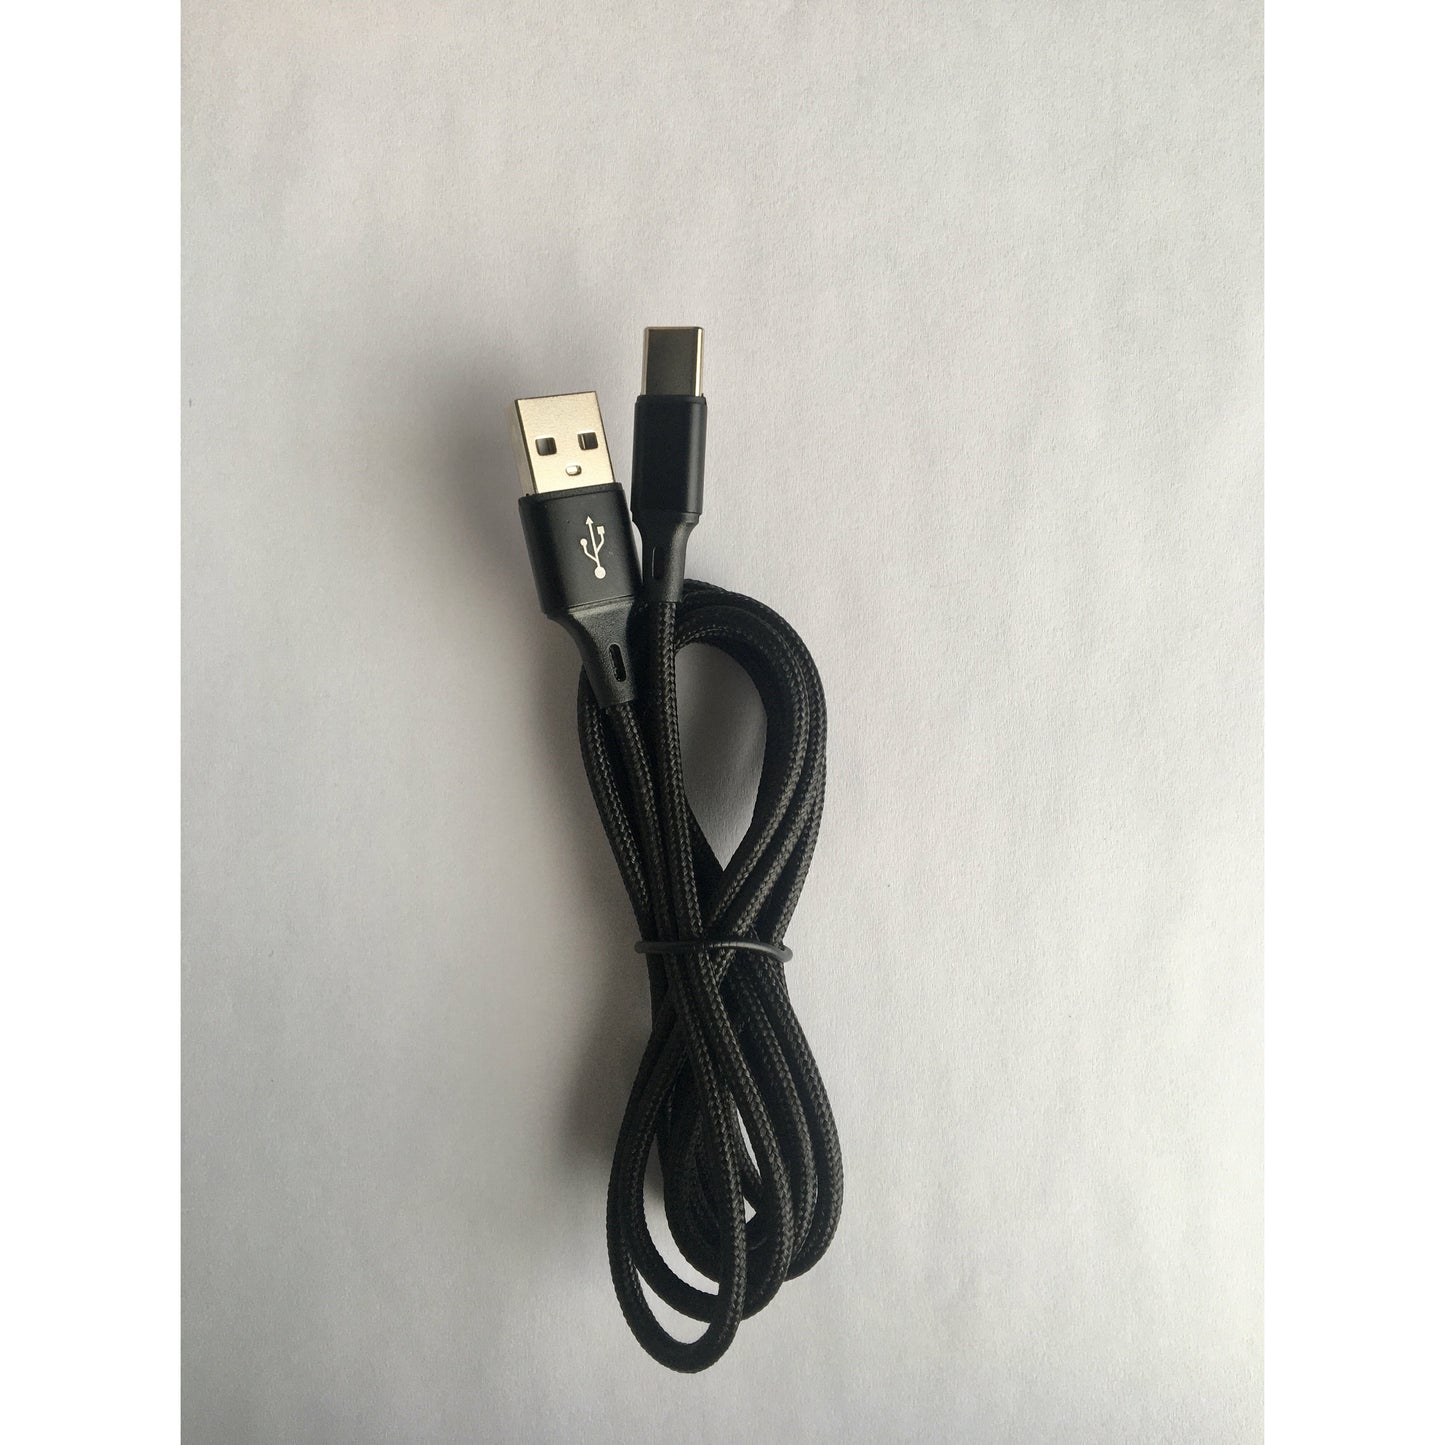 USB-C to USB-A Cable - X-Bows Store